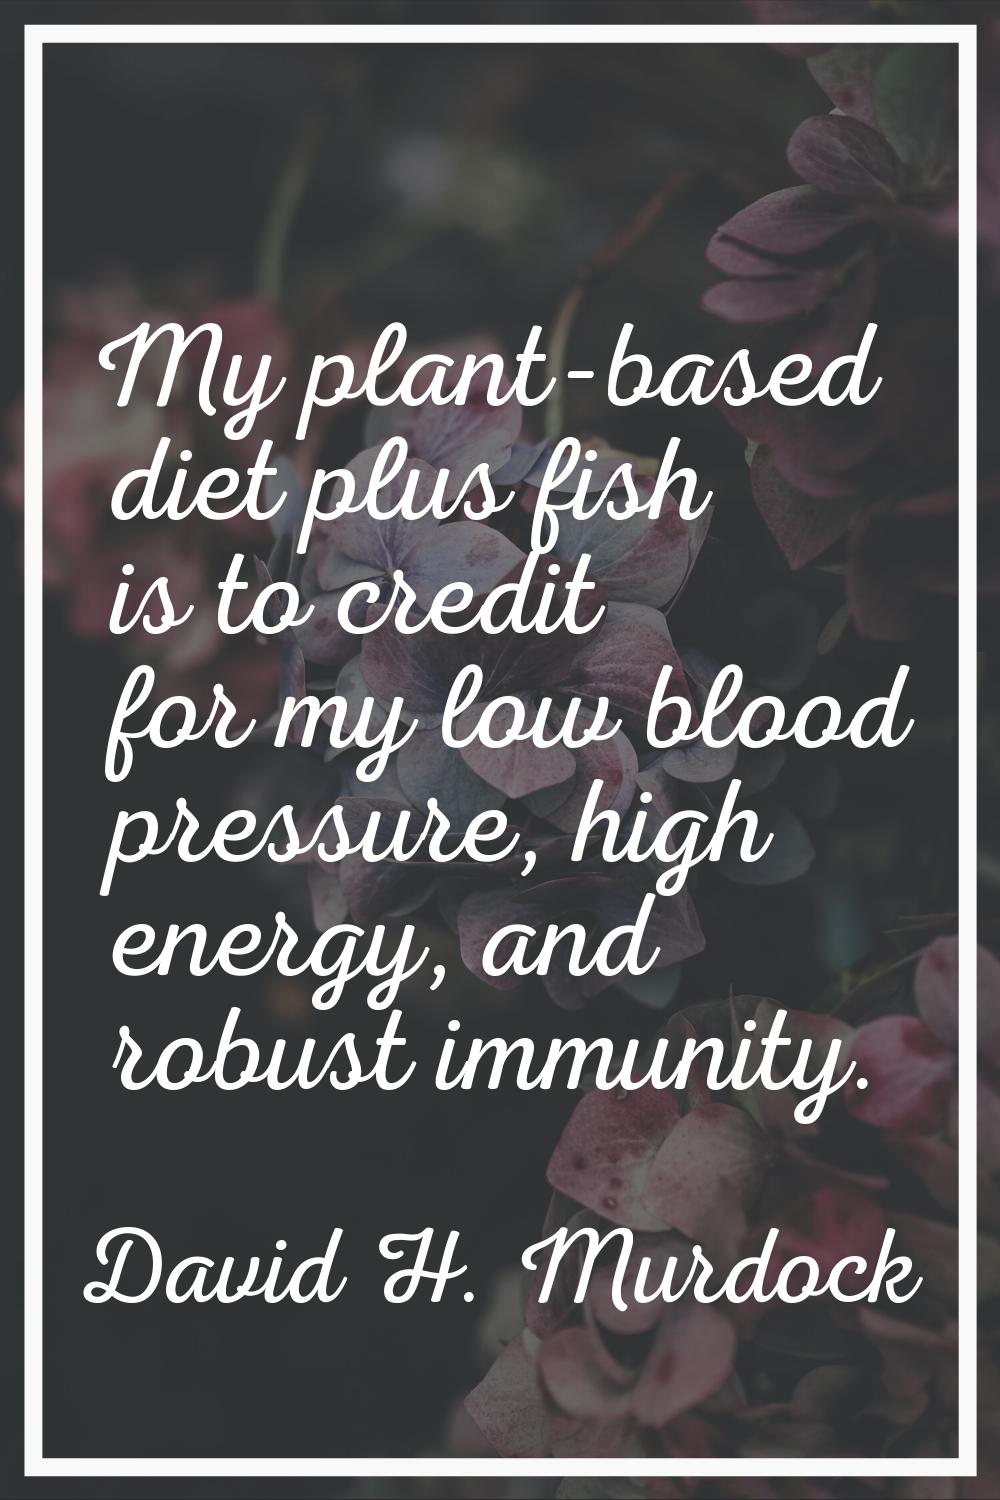 My plant-based diet plus fish is to credit for my low blood pressure, high energy, and robust immun